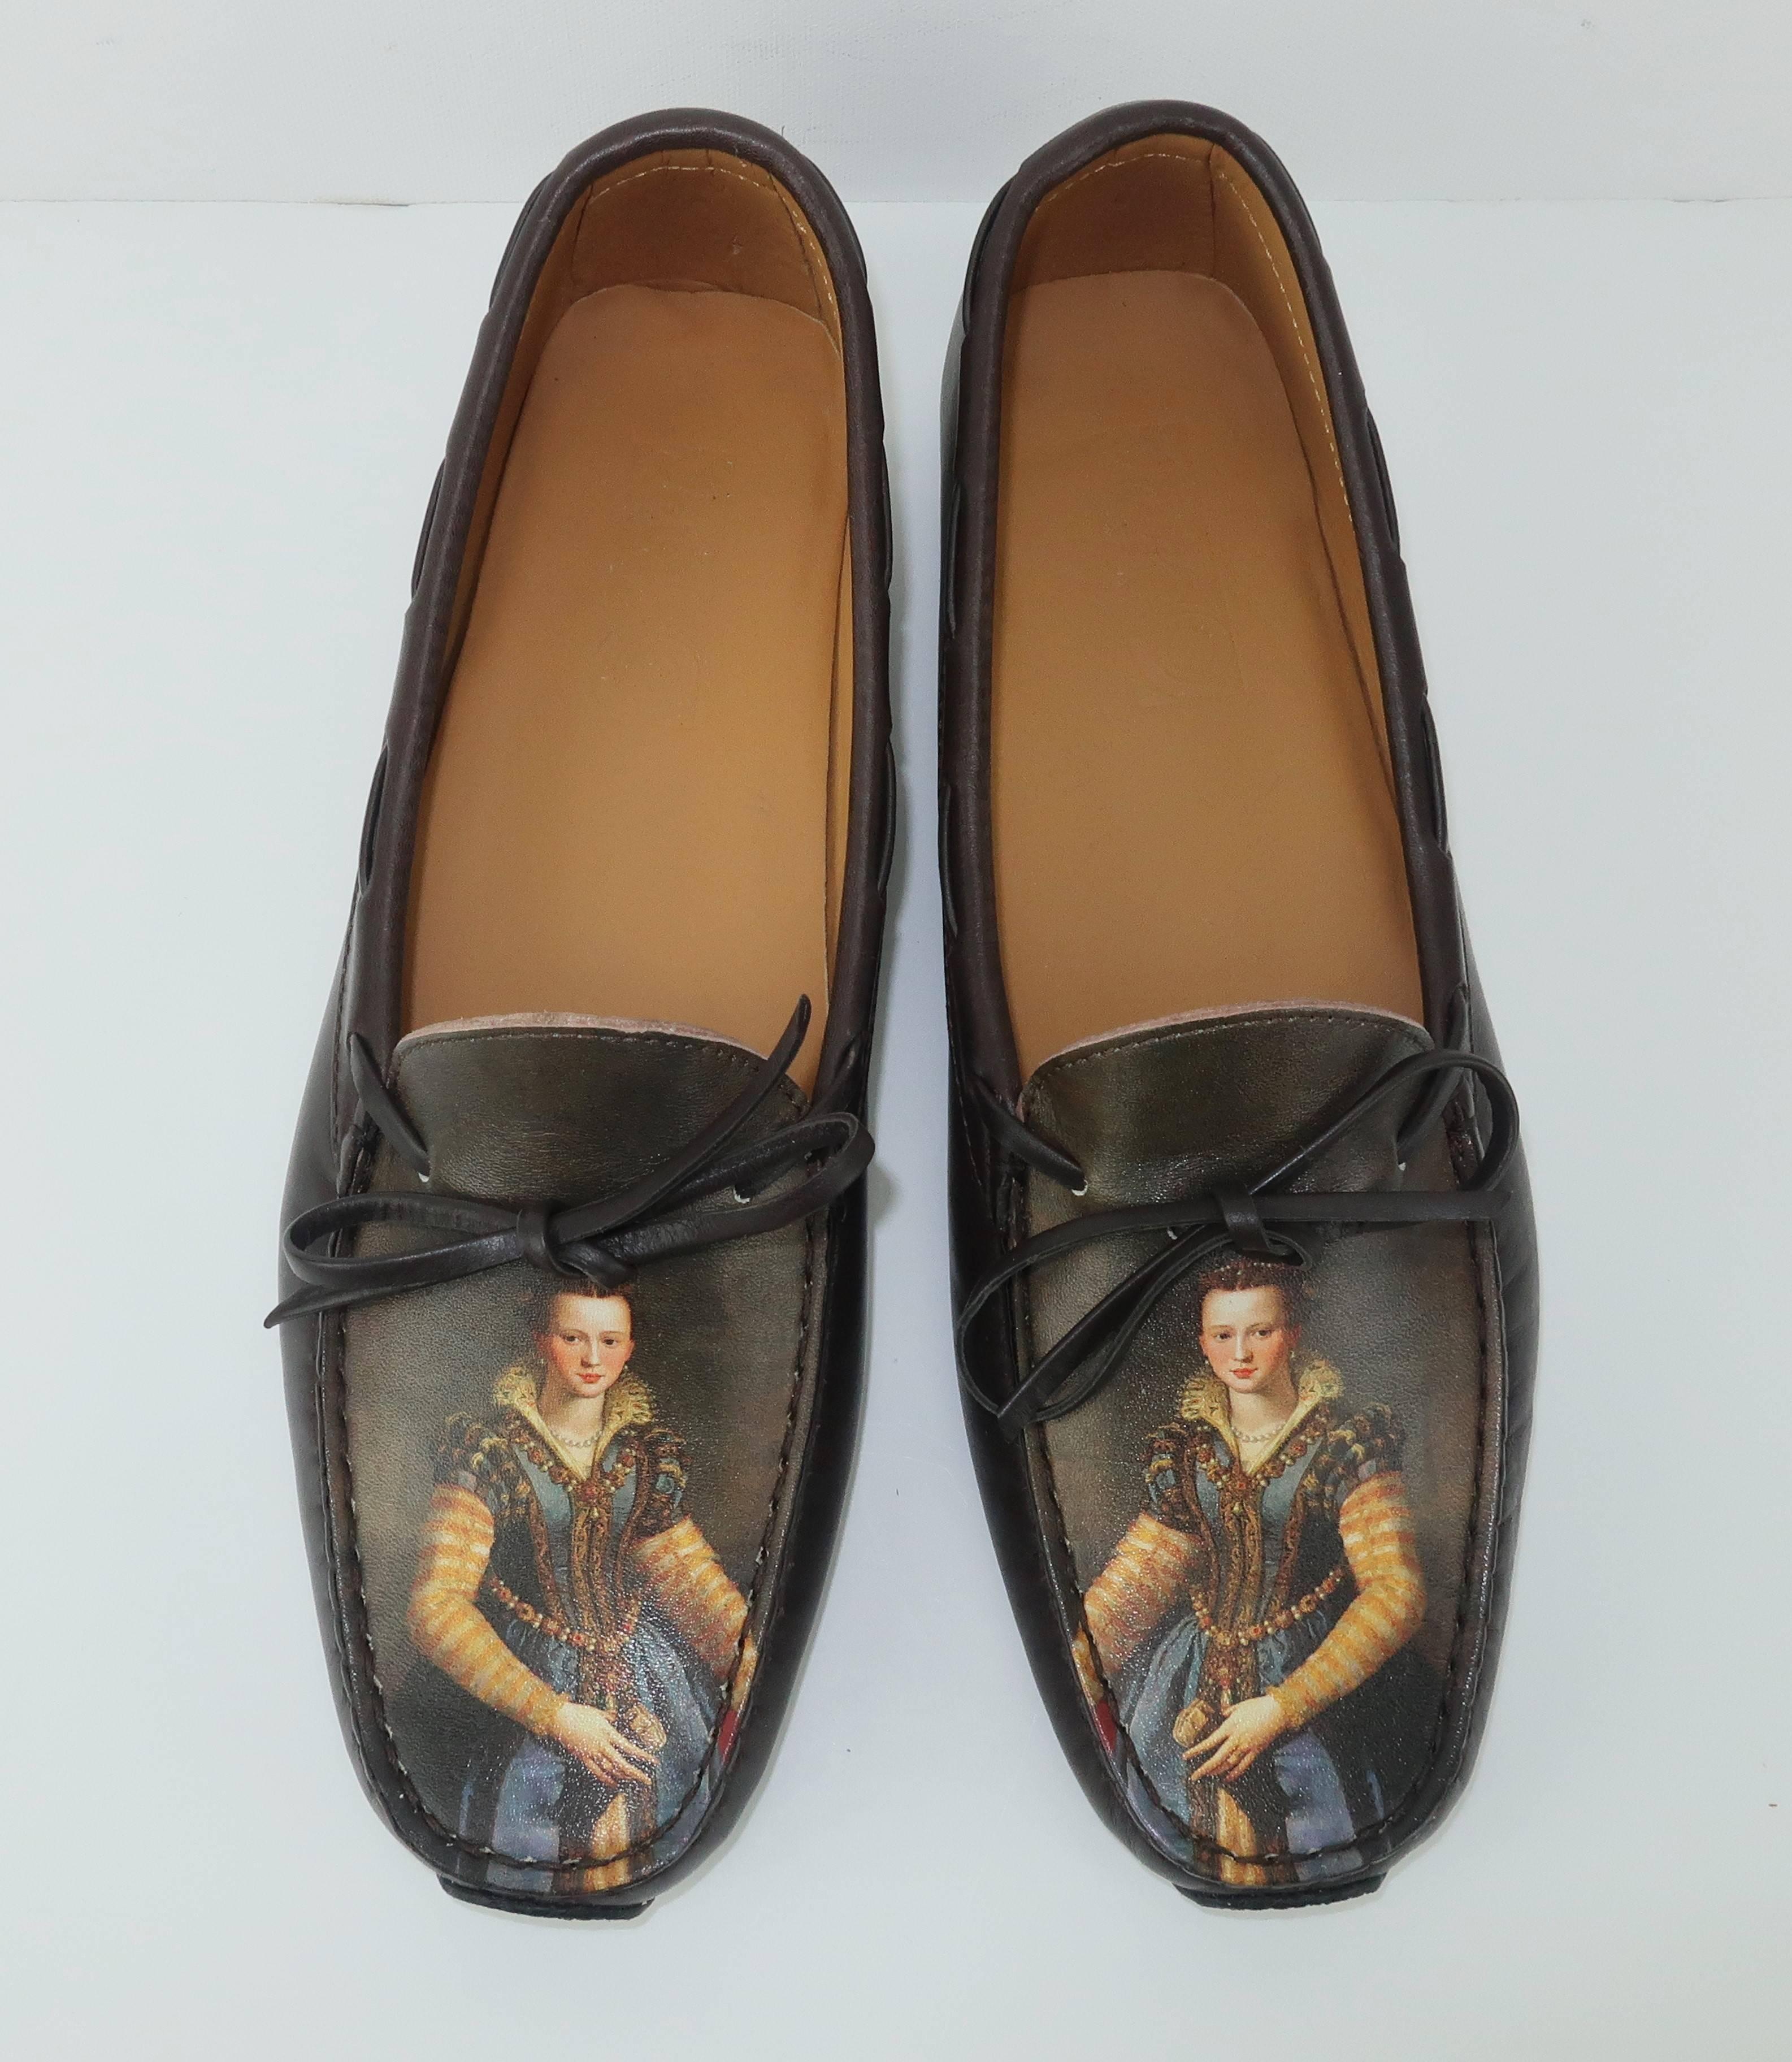 These comfy and clever dark brown moccasin loafers are printed with a portrait of Maria de Medici painted by Alessandro Allori in the late 1500's.  They were manufactured in Italy by Icon shoes using their licensed method of printing works of art on